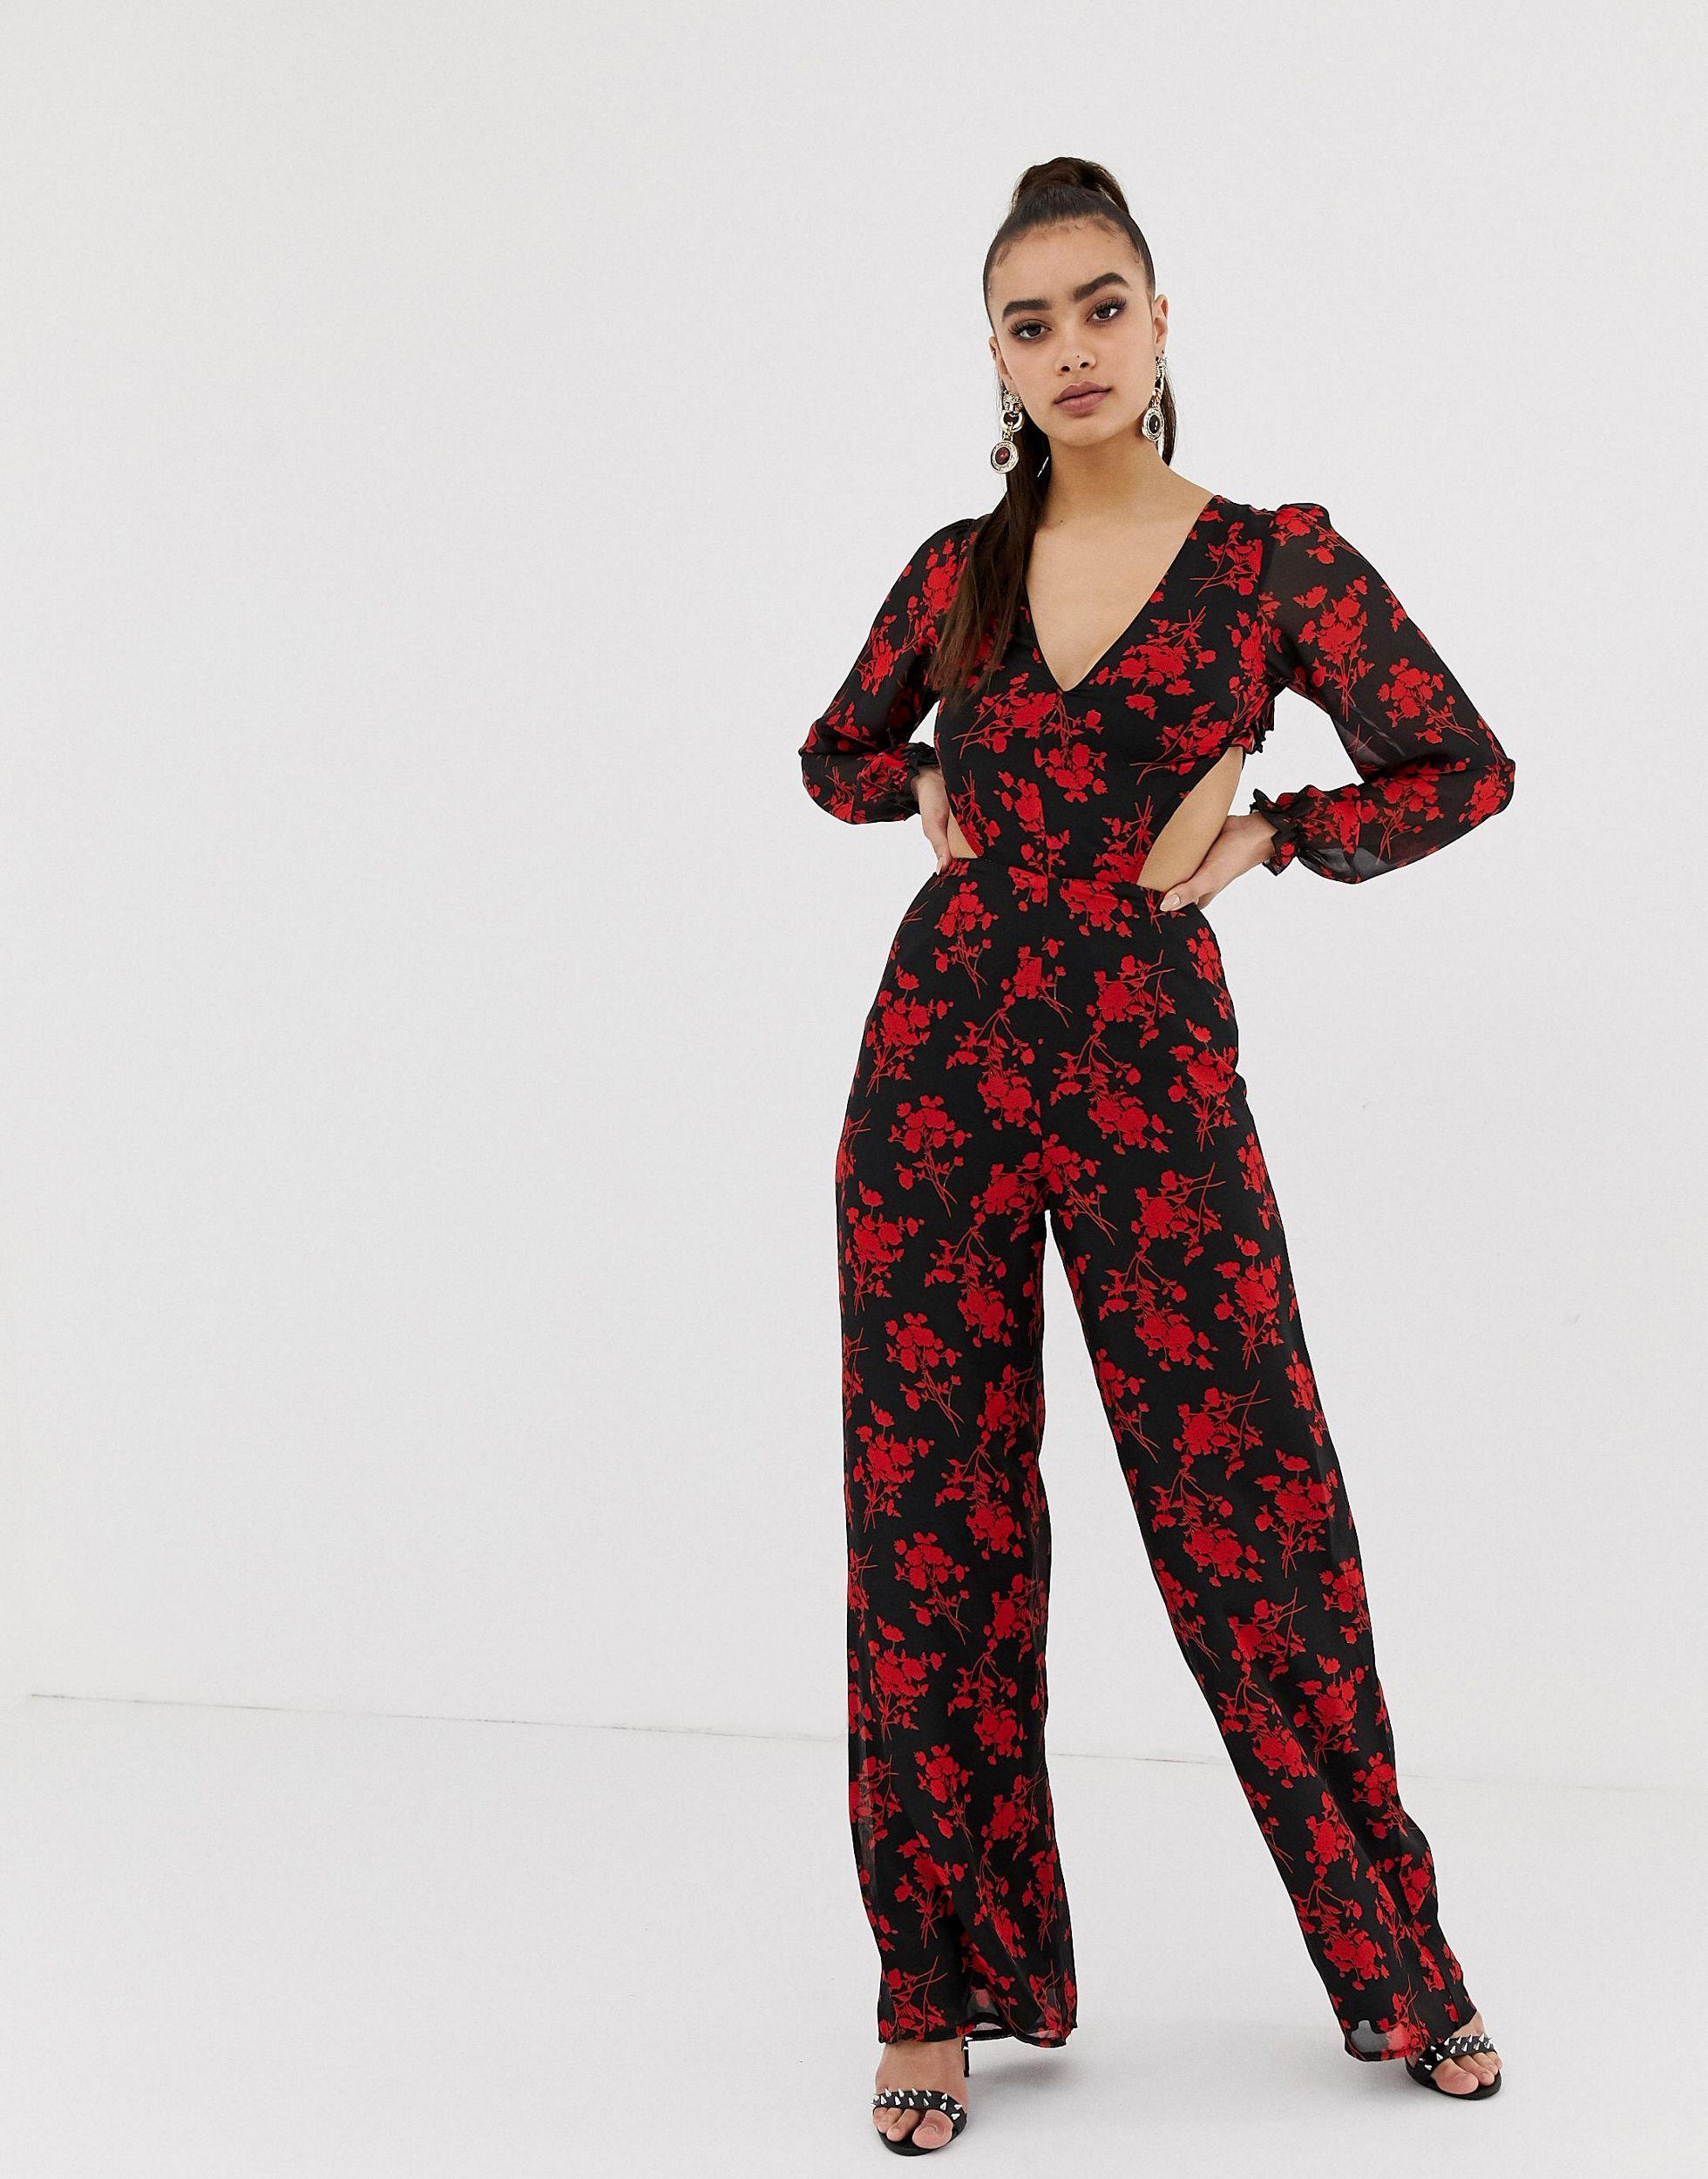 Missguided Synthetic Floral Frill Open Back Jumpsuit in Black - Lyst